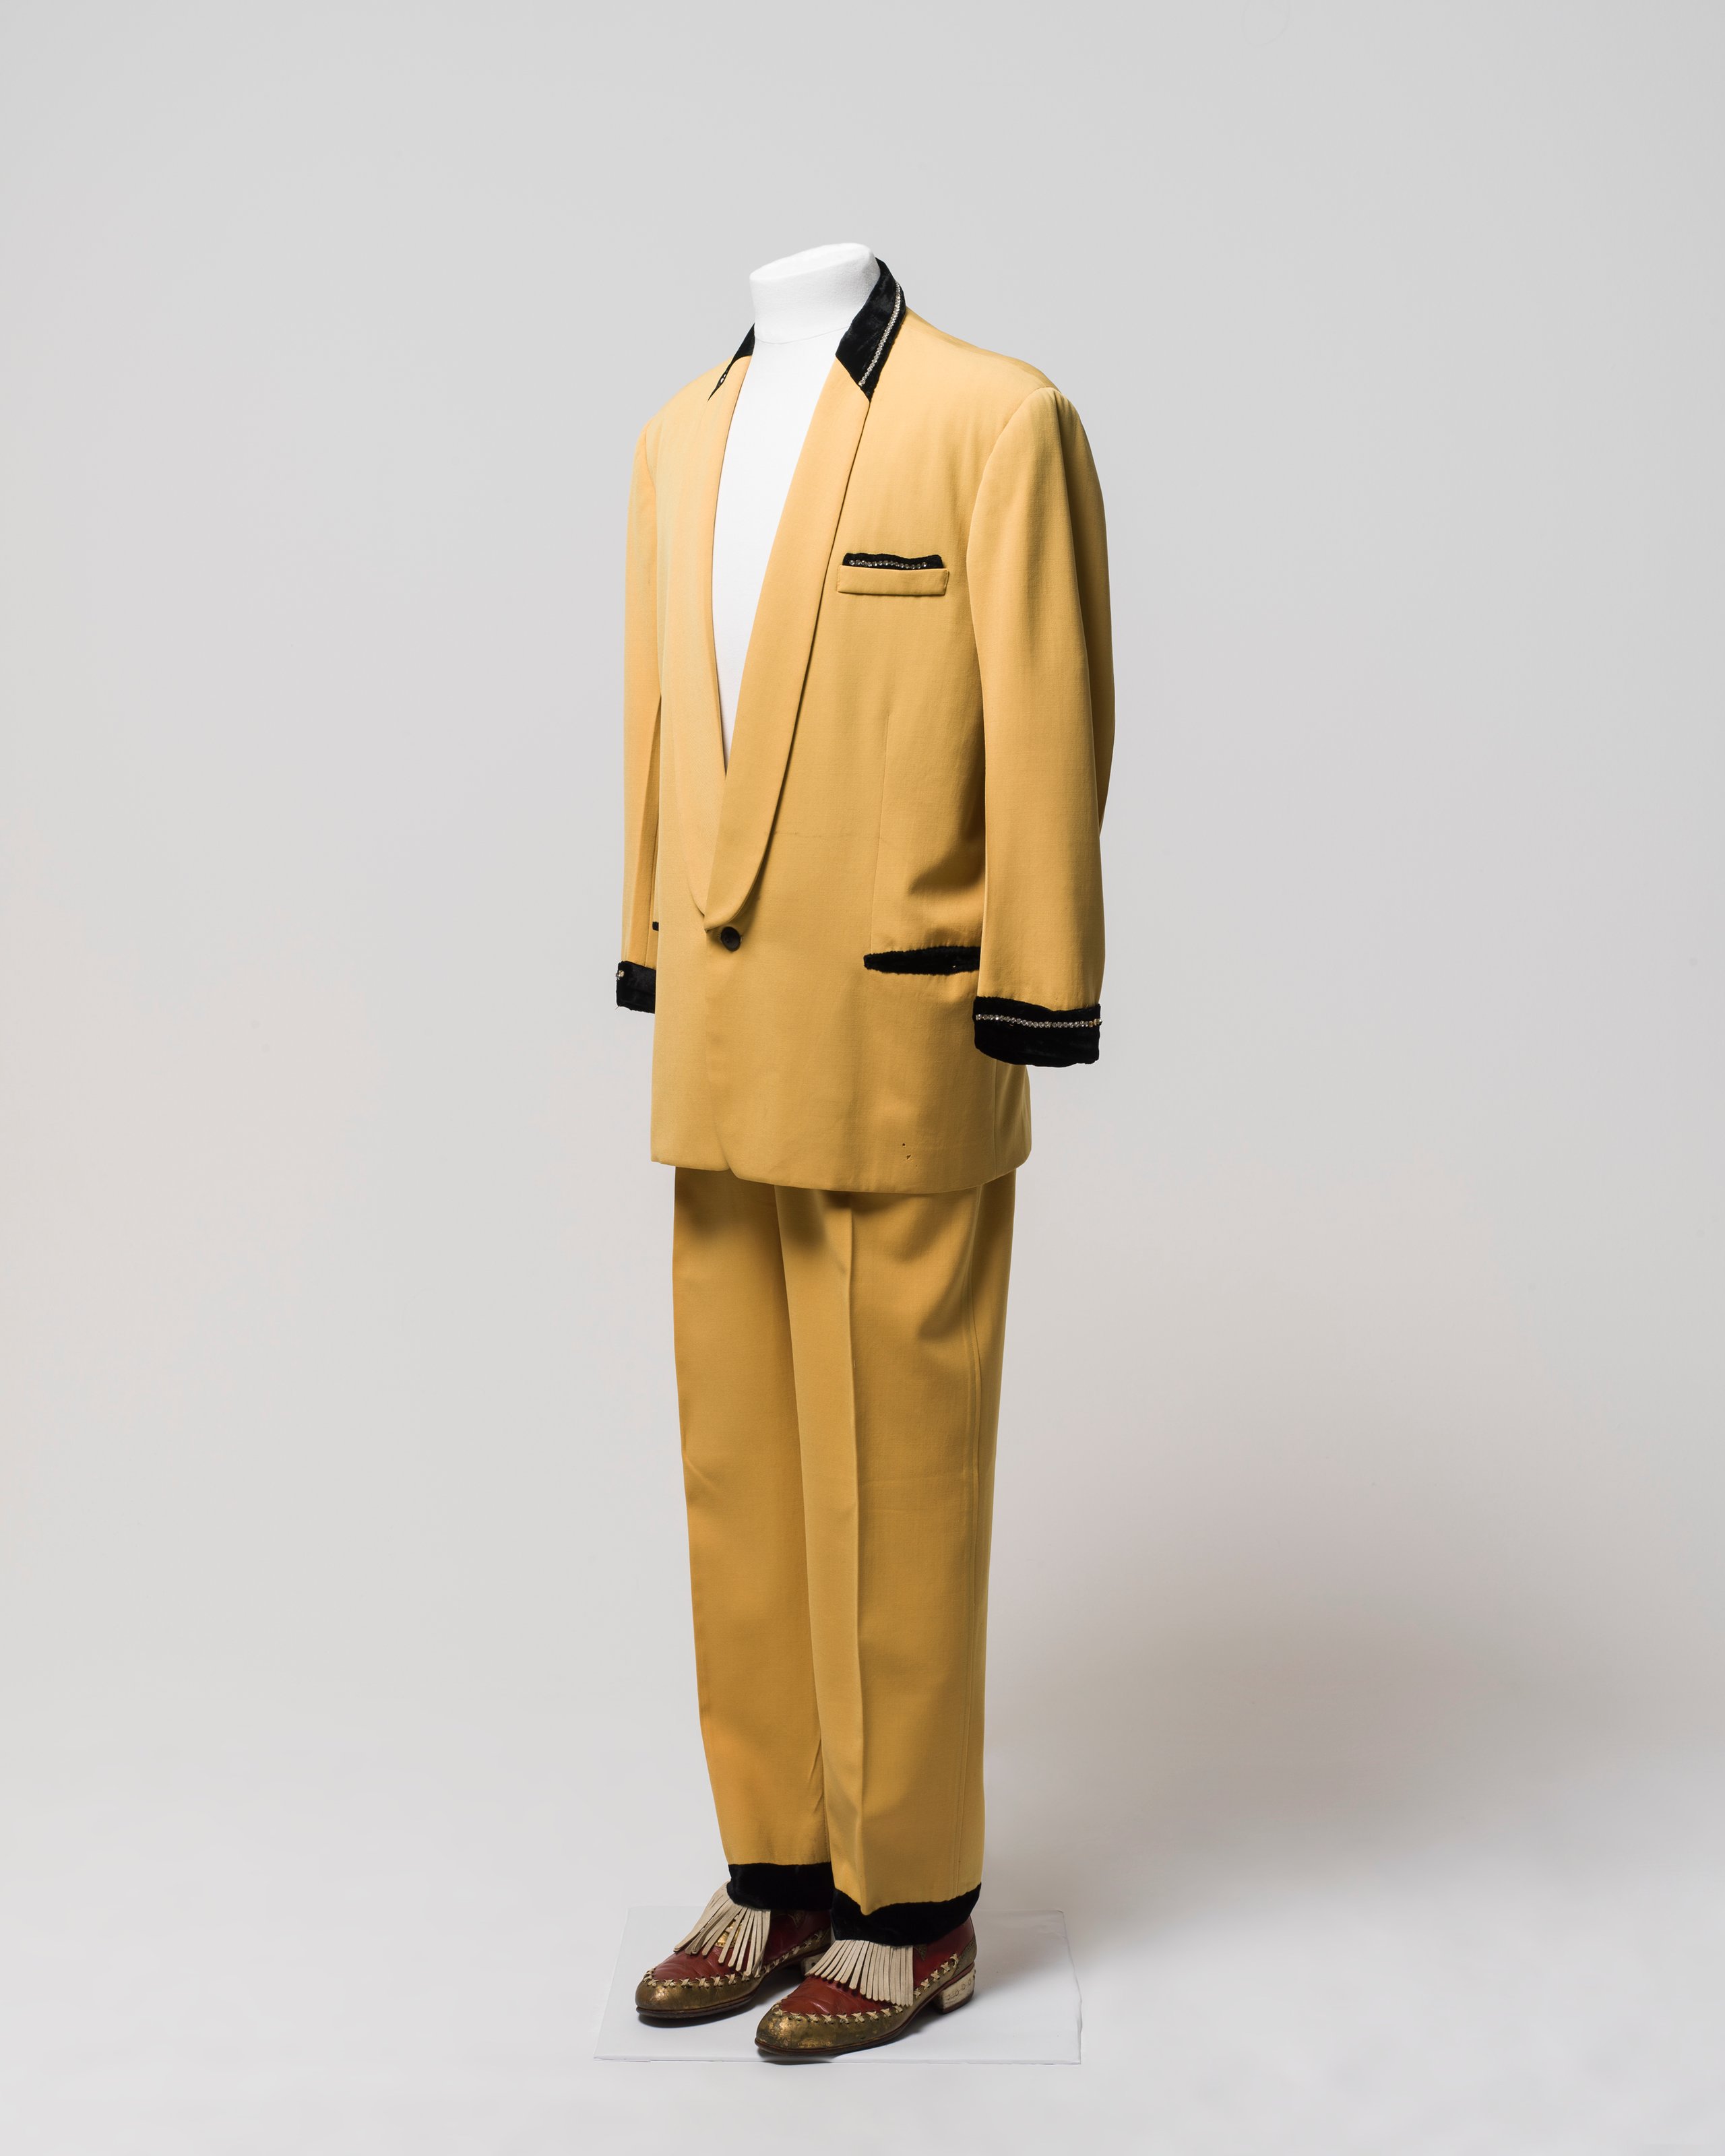 Suit worn by Johnny O'Keefe and made by Len Taylor